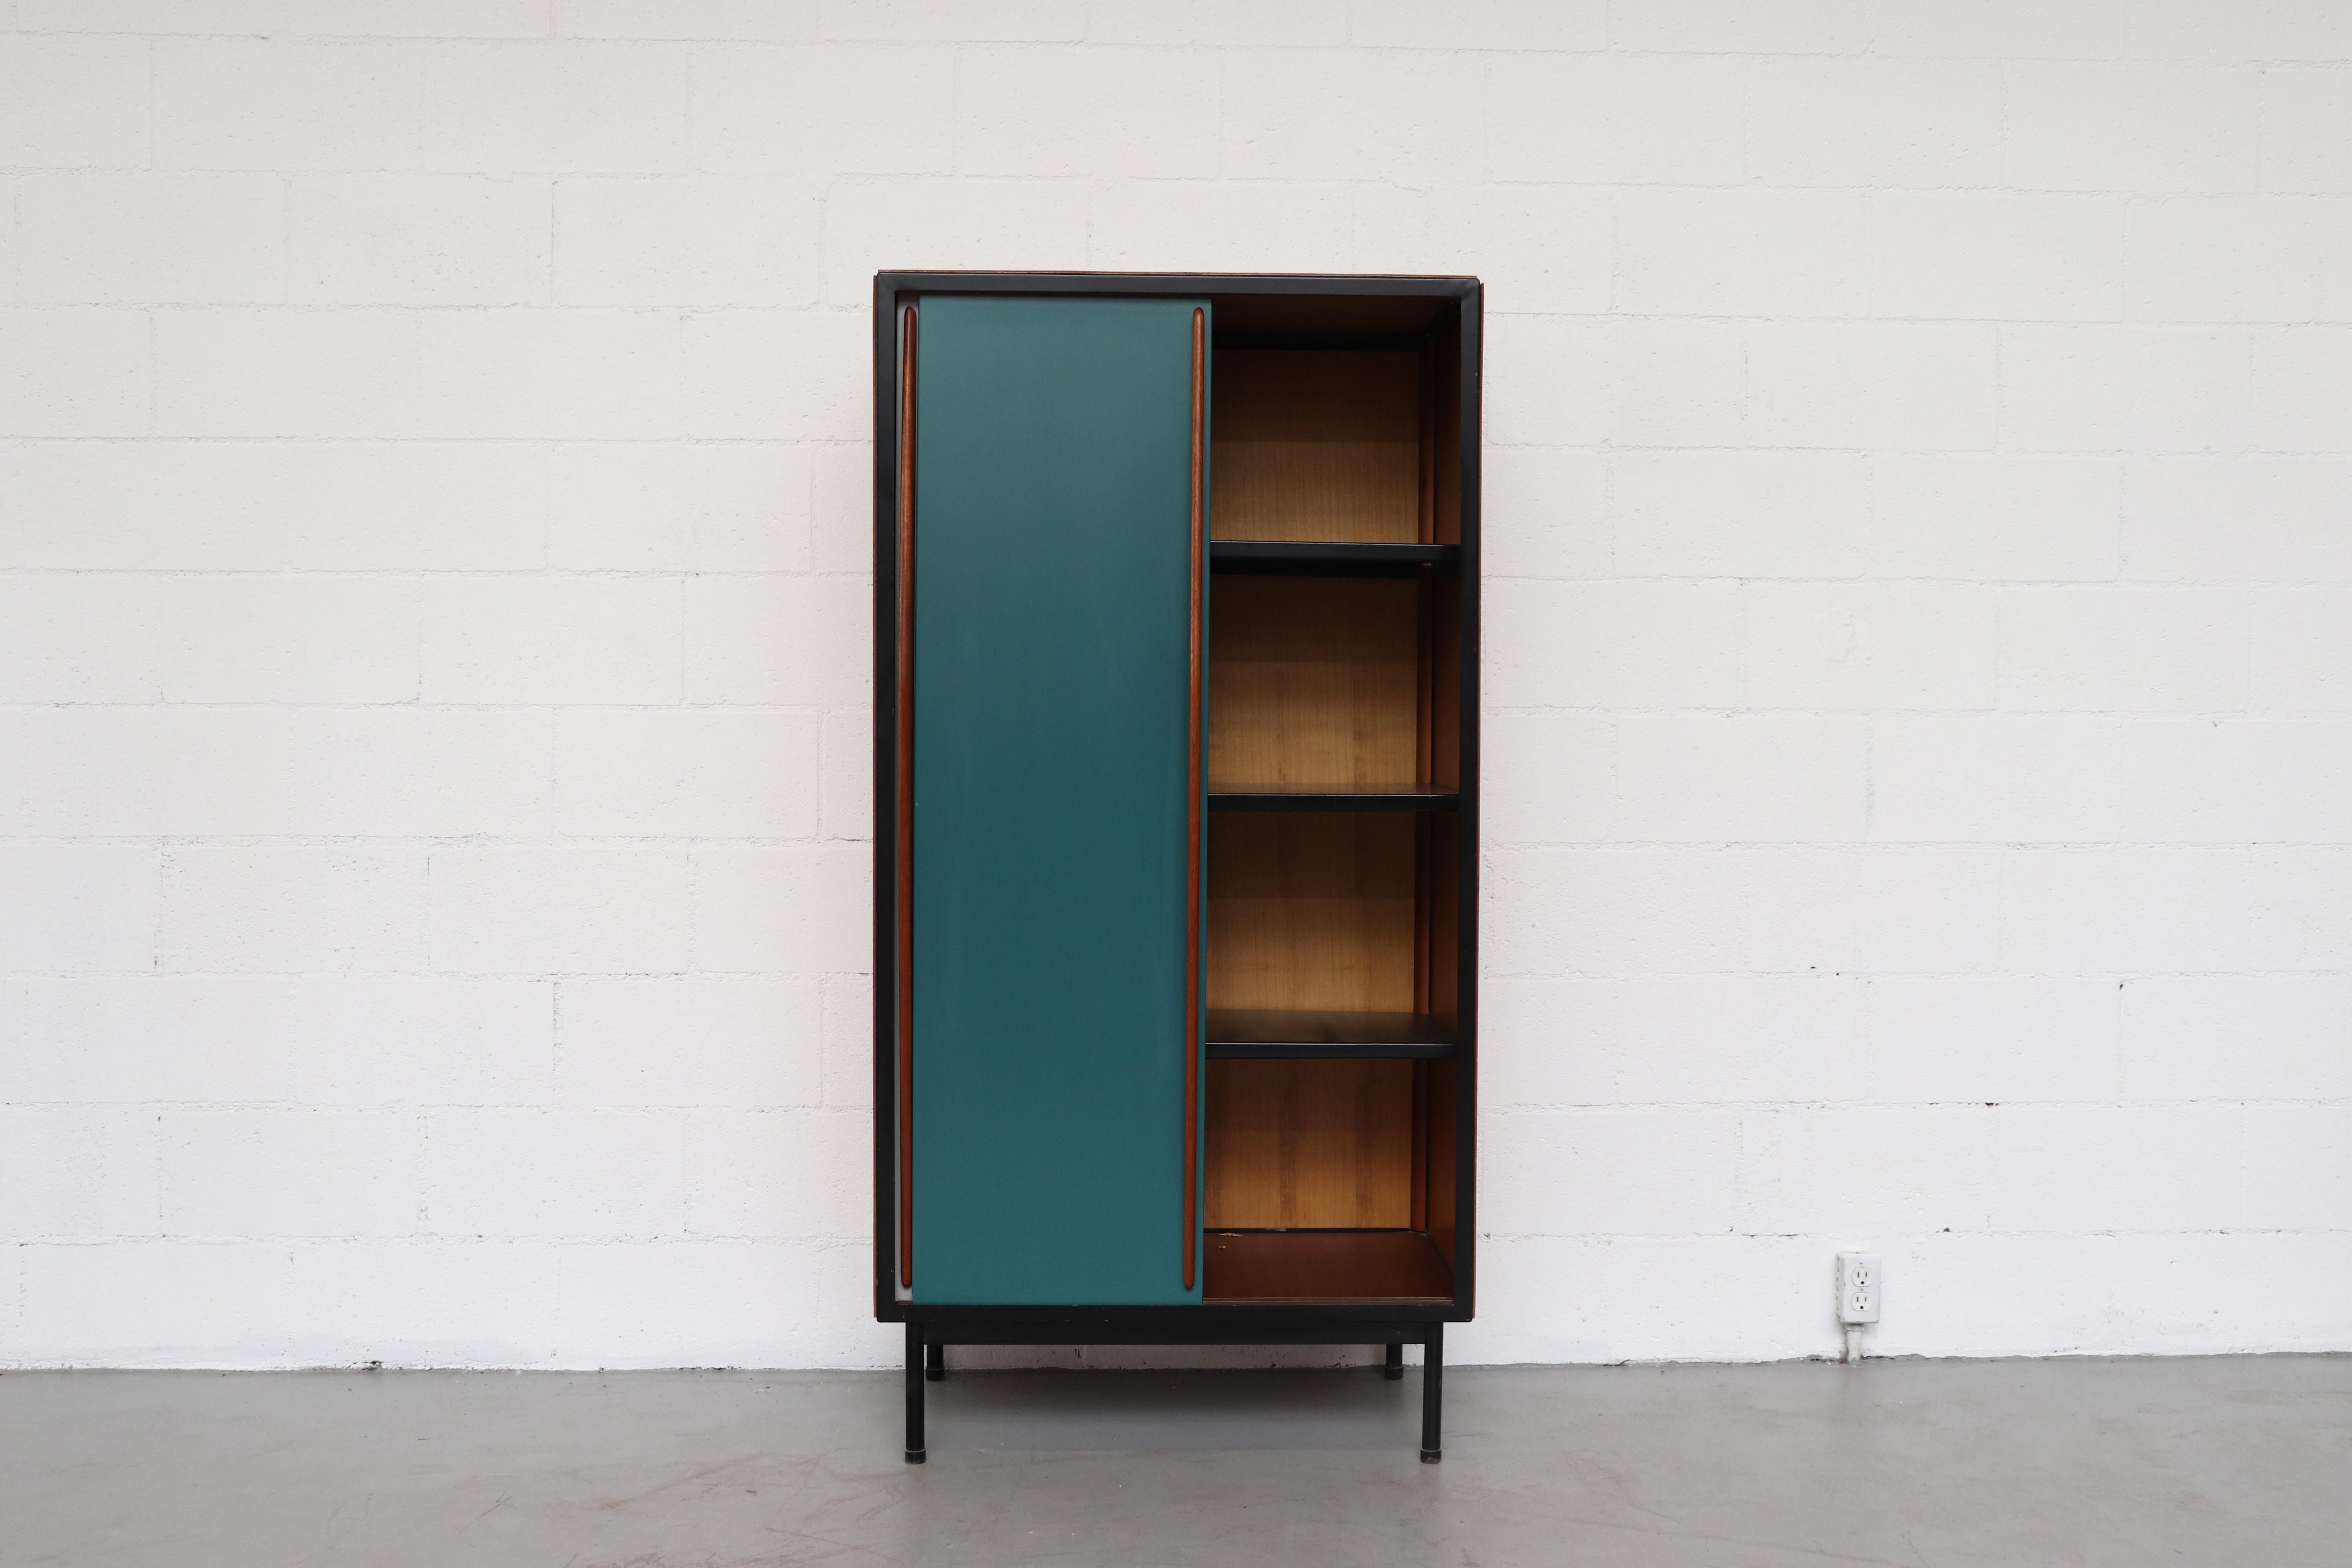 Willy Van Der Meeren large wardrobe for Tubax with wood paneled sides, tapered mahogany door pulls and teal and grey enameled metal doors with black enameled metal frame, Belgium, 1952. Visible wear, consistent with its age and usage.